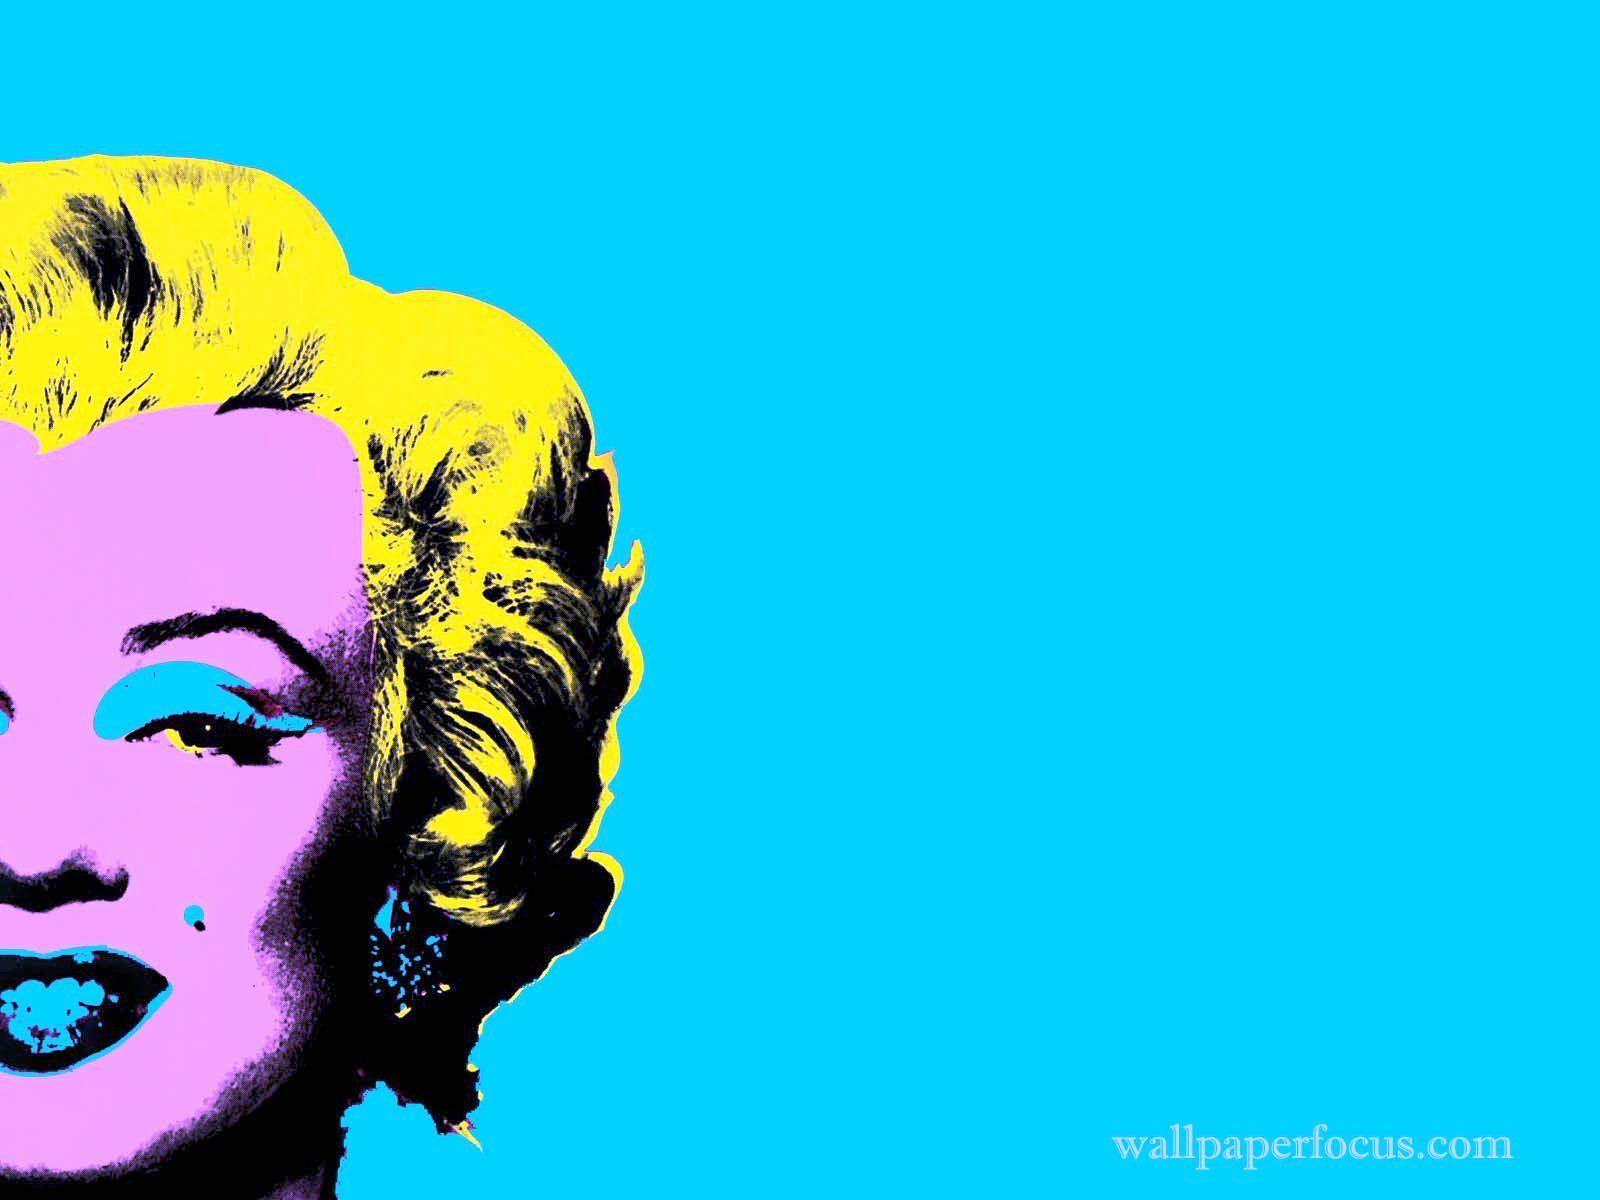 Andy Warhol Computer Wallpapers Top Free Andy Warhol Computer Backgrounds Wallpaperaccess